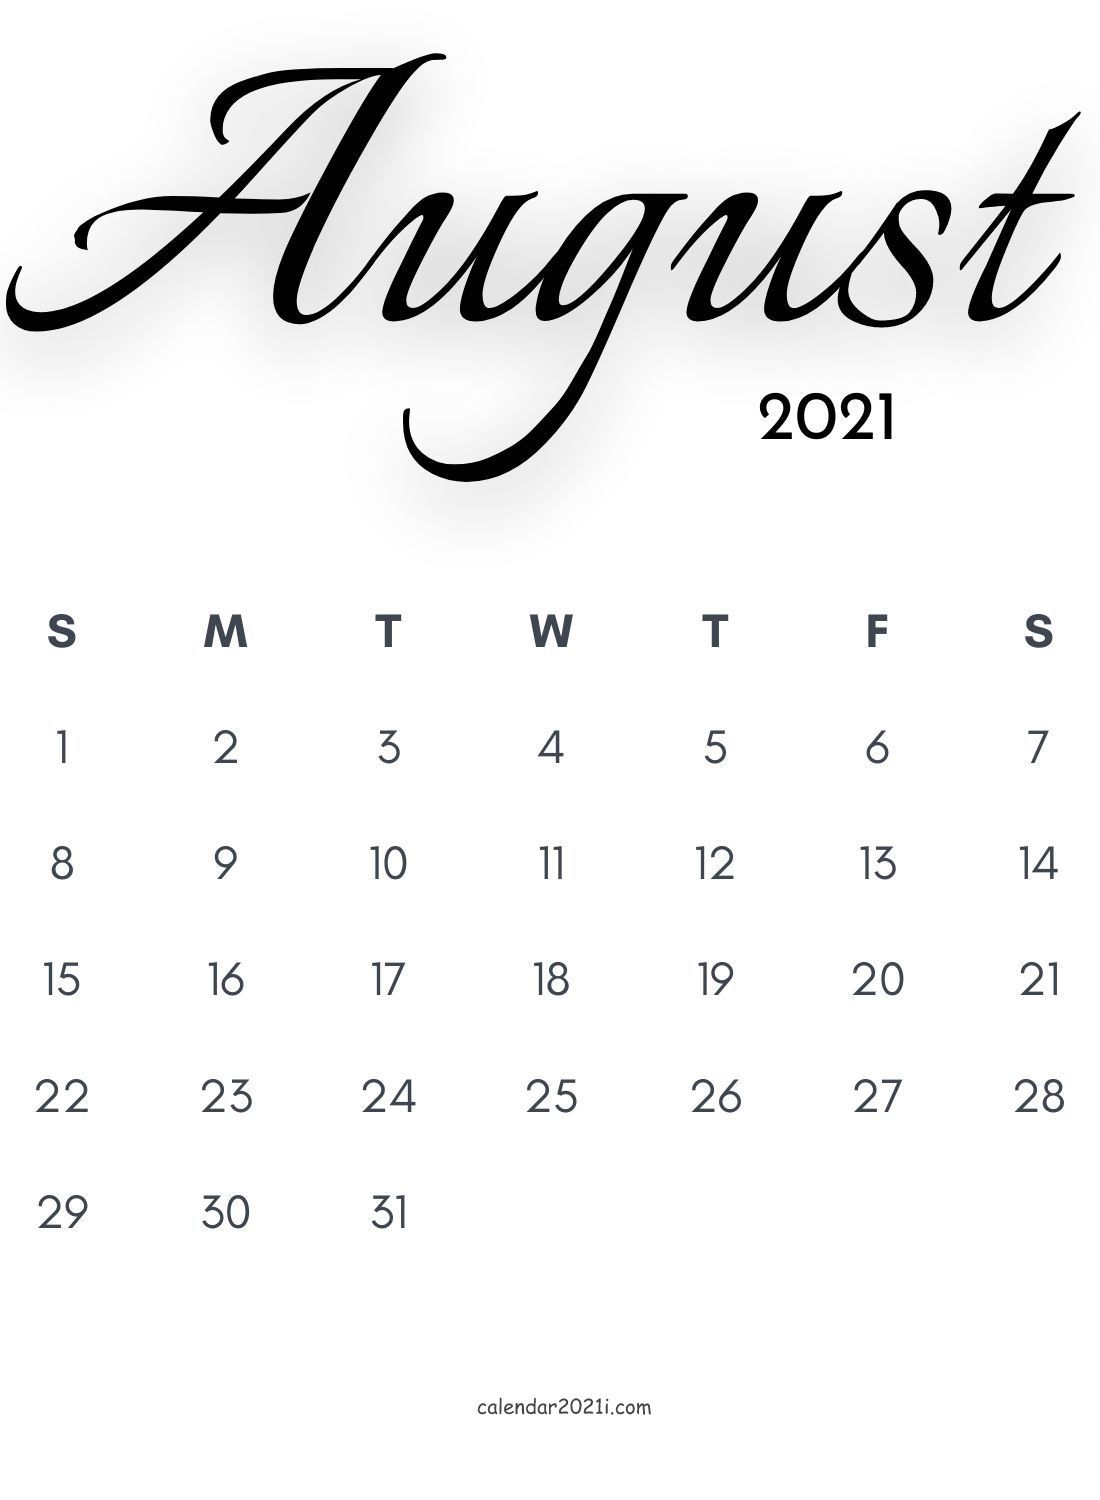 August 2021 Calligraphy Calendar Free Download | Calligraphy